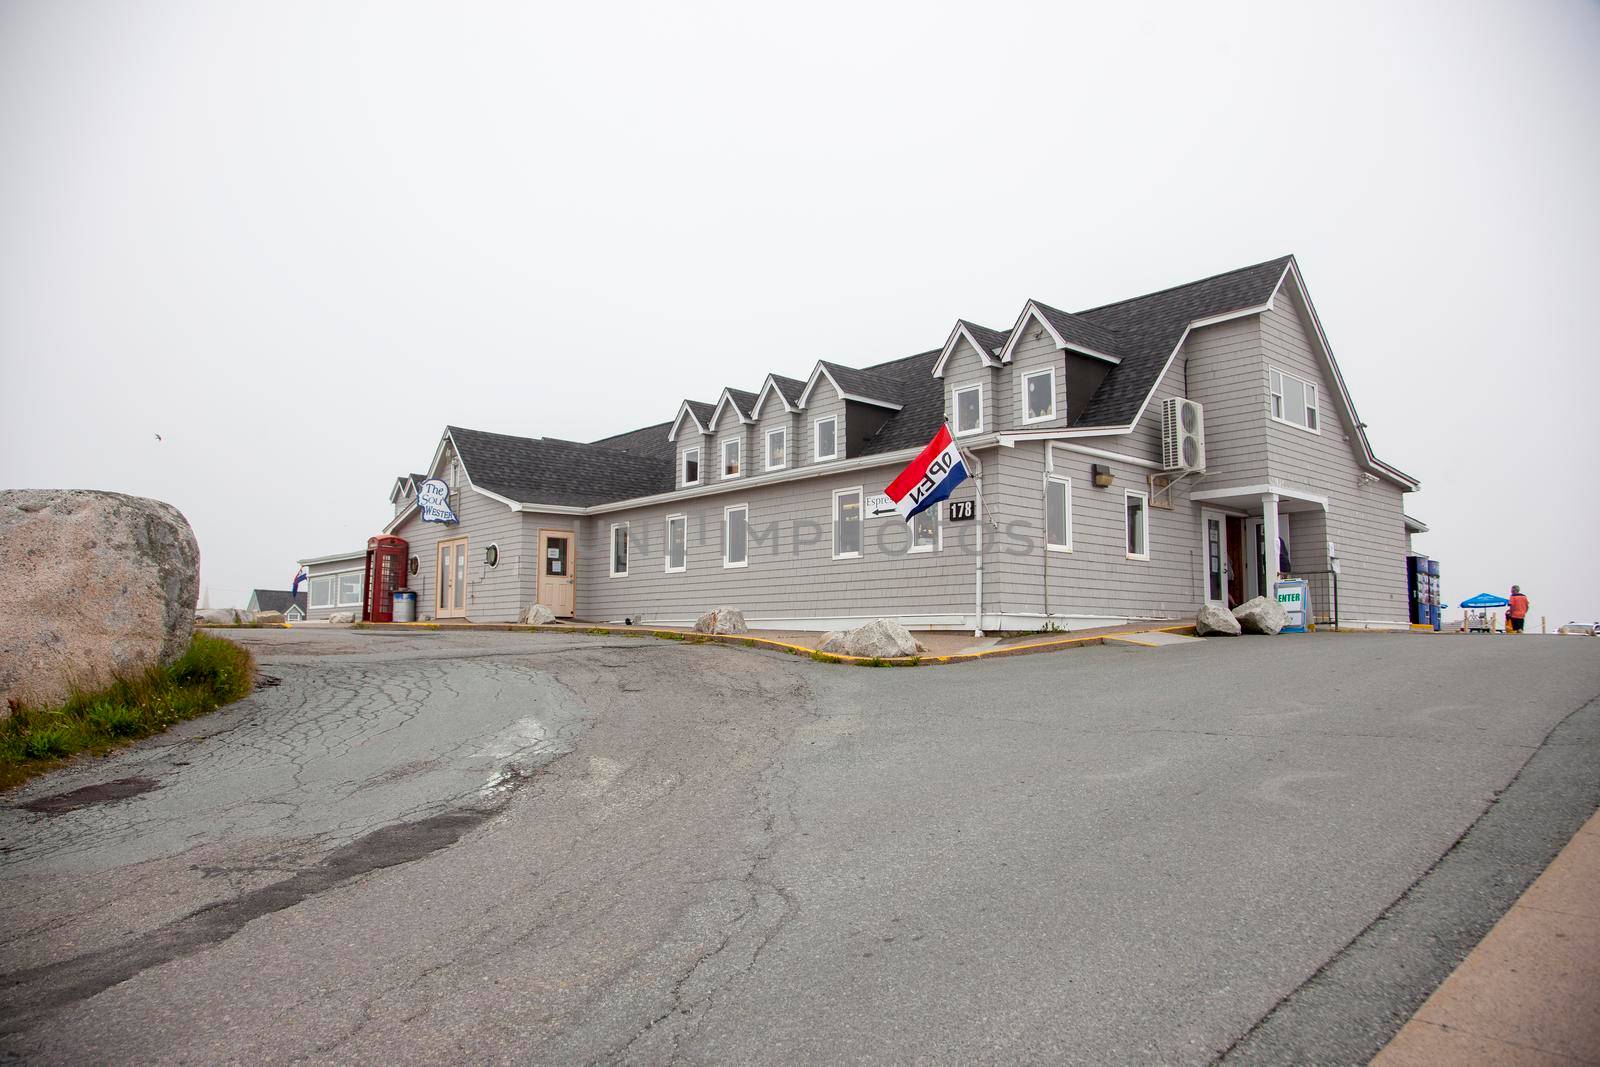 Halifax, Nova Scotia: July 19, 2020: The landmark Sou Wester restaraunt on a foggy day in the summer at the famous Peggy's Cove area